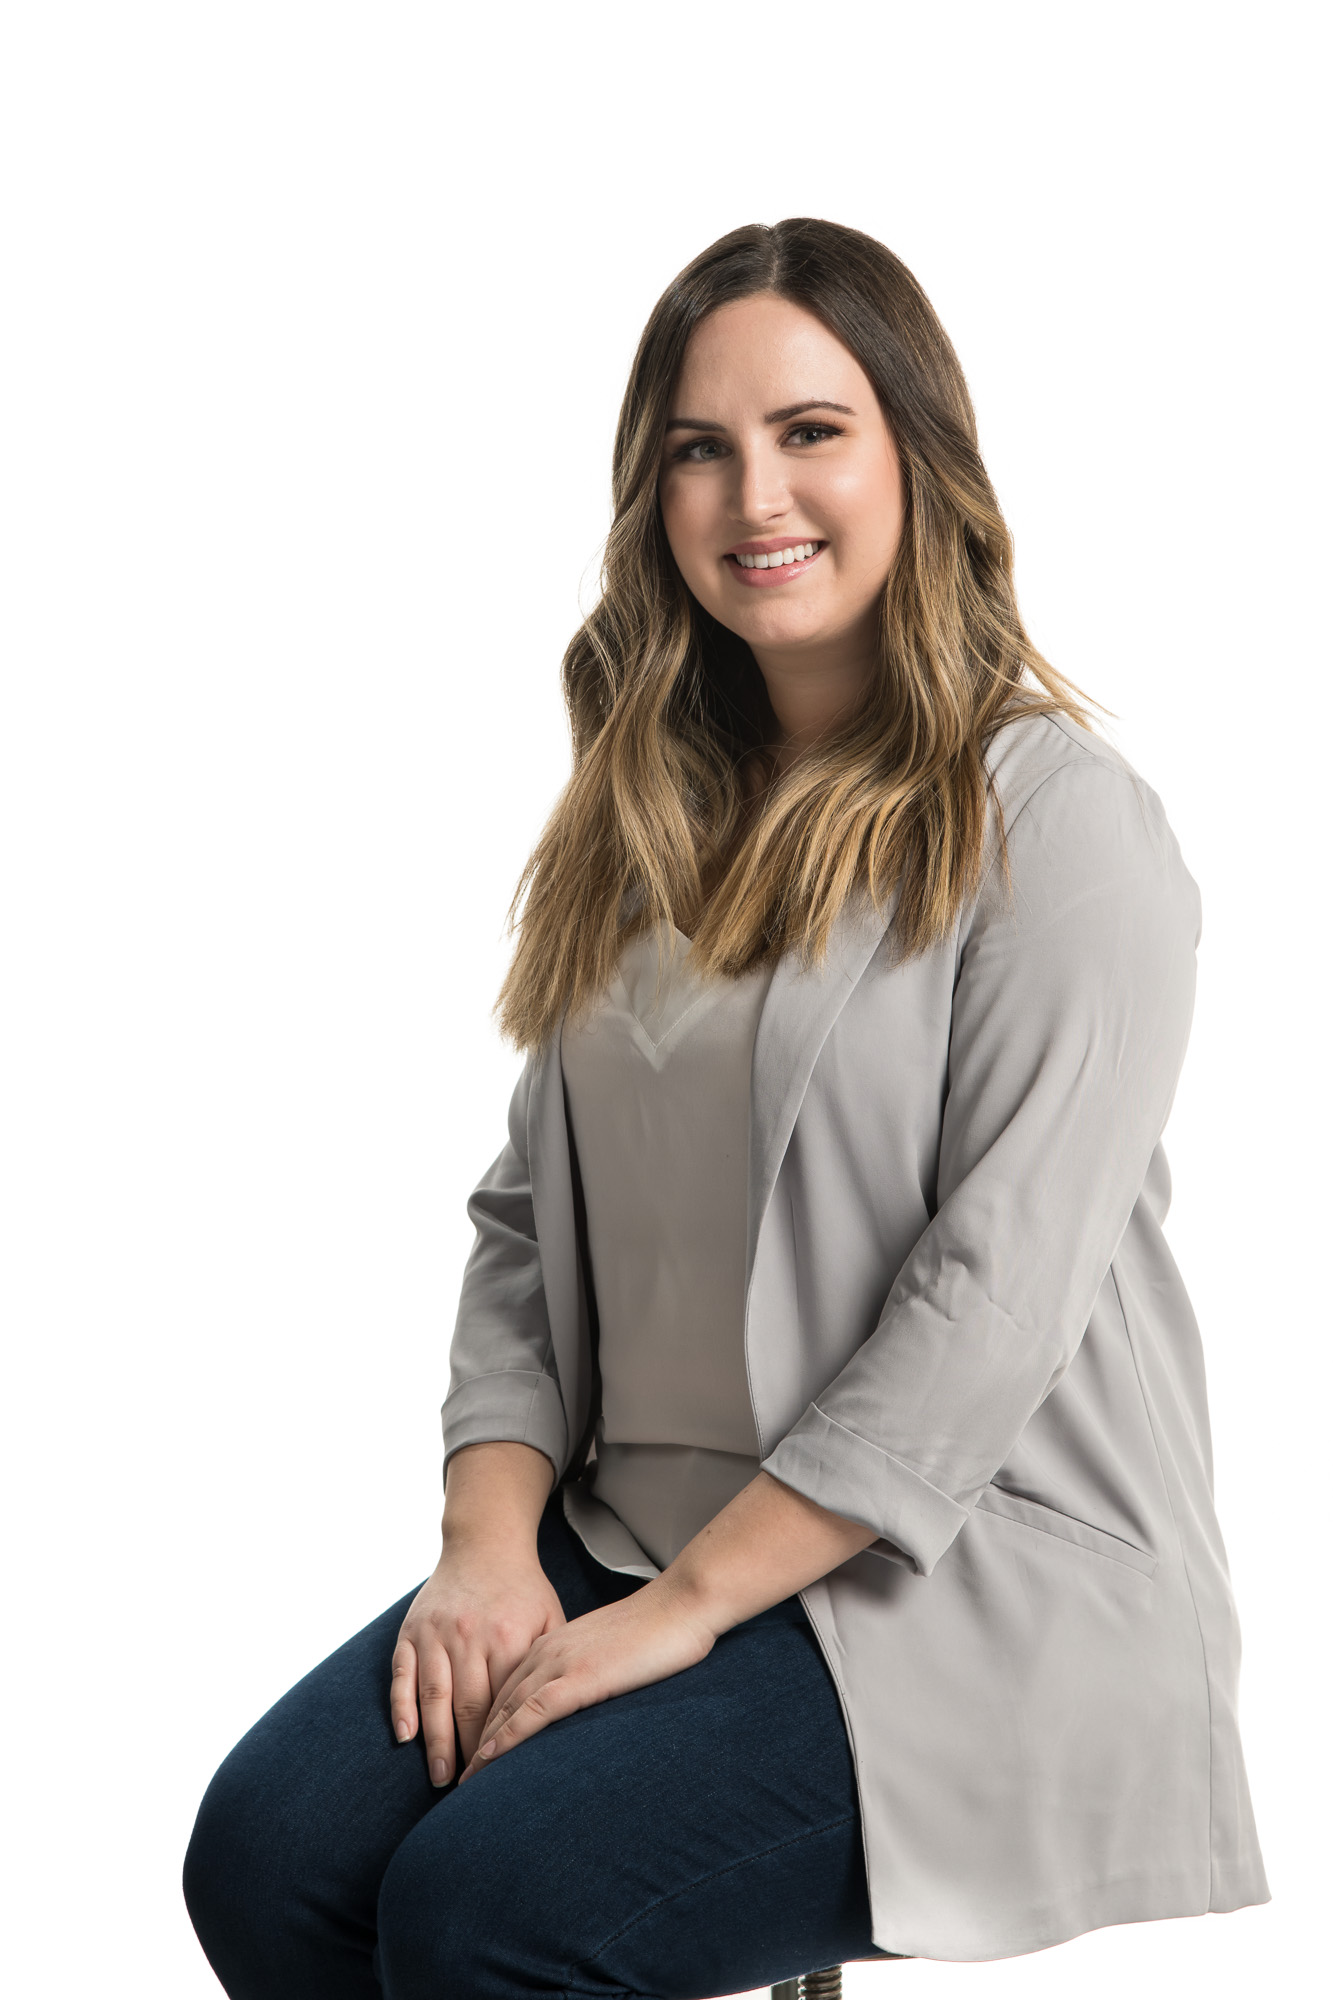 photo of a young female professional on a white backdrop